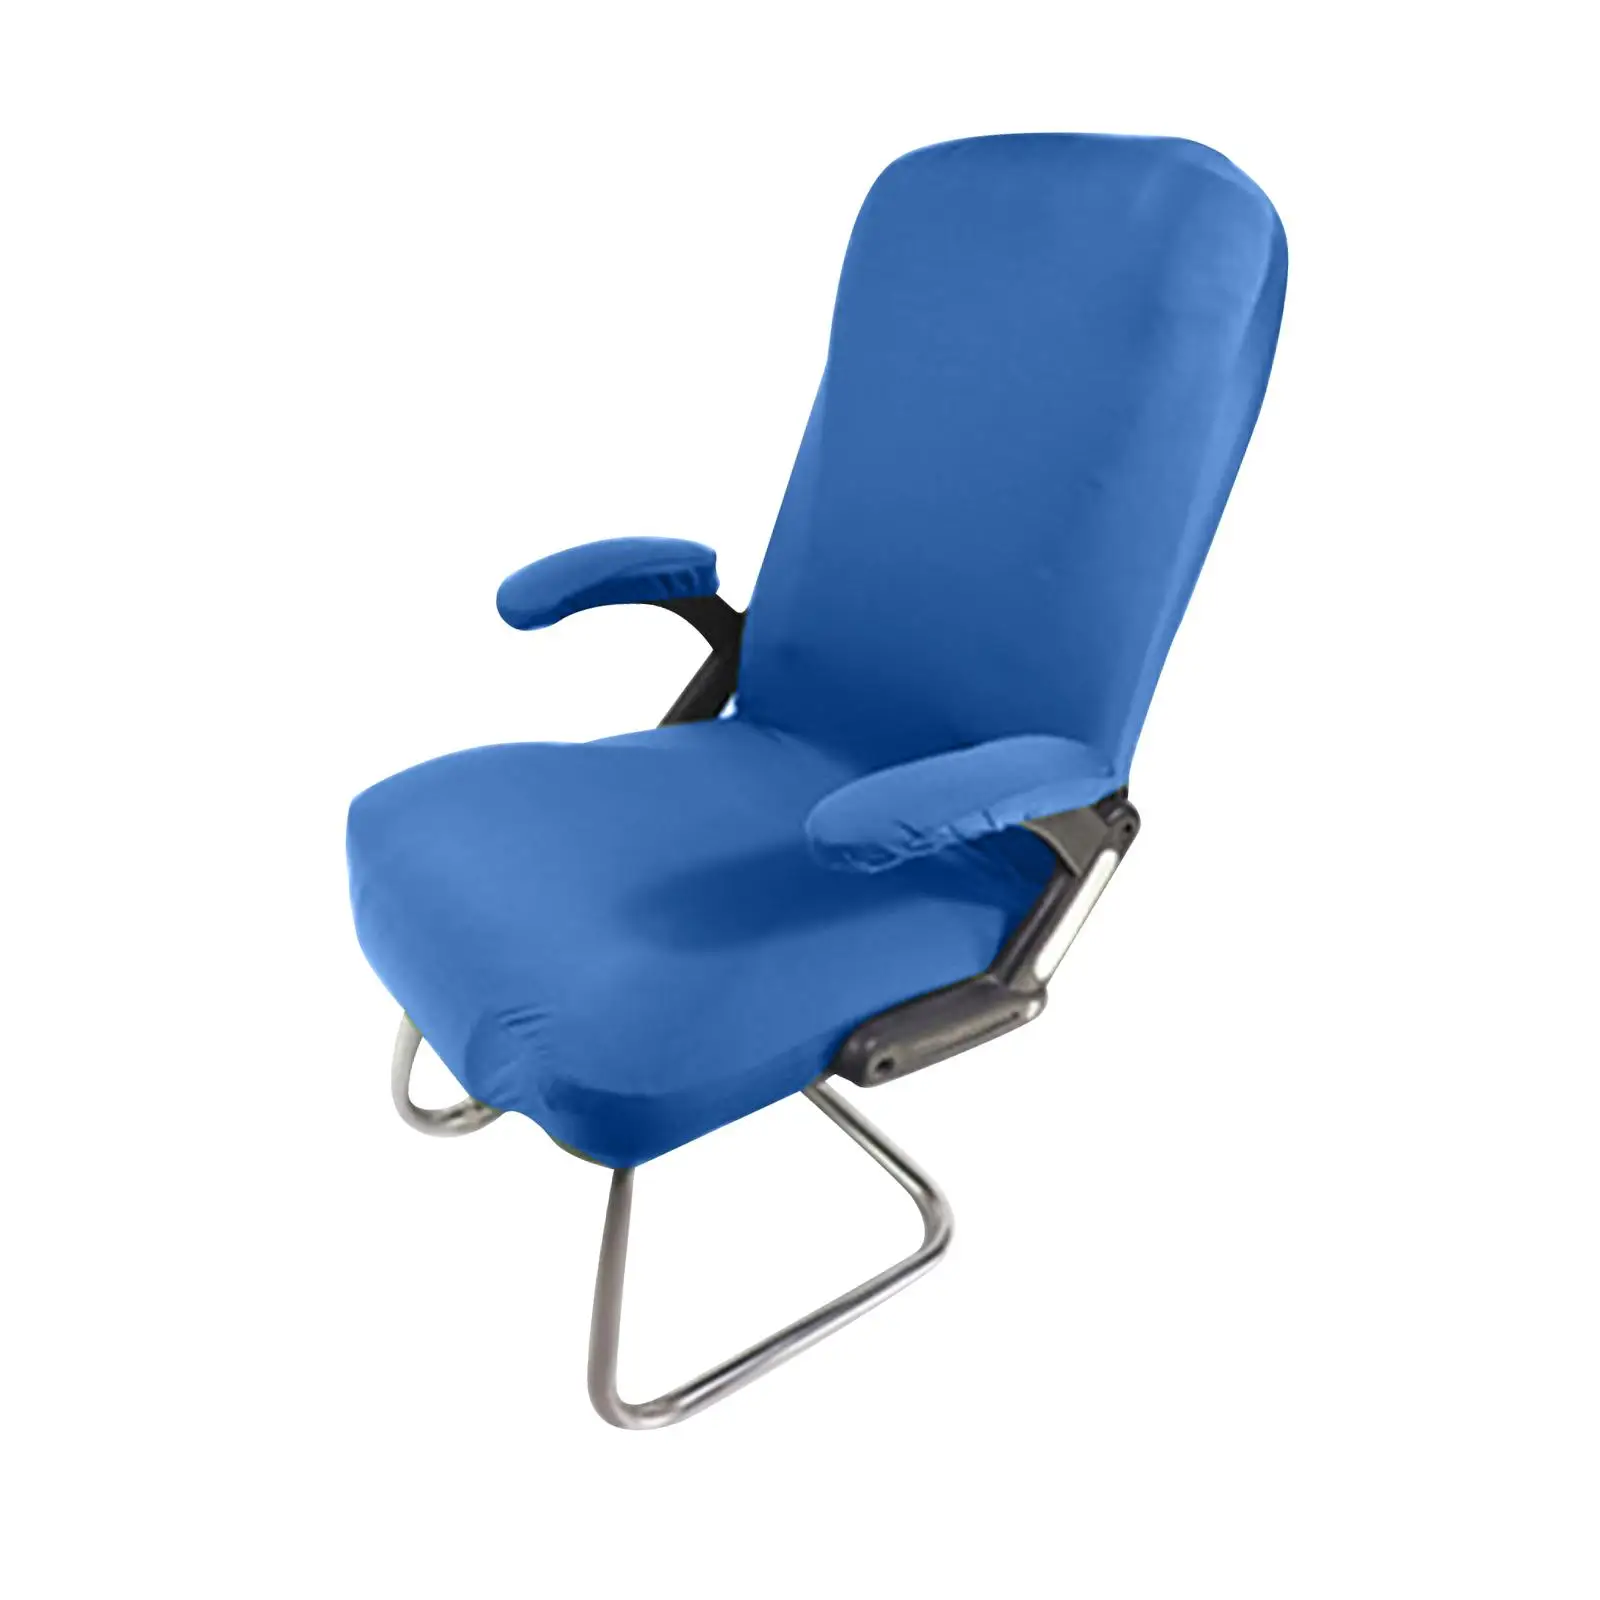 Elastic Rotating Chair Cover Removable Washable Polyester for Computer Chair